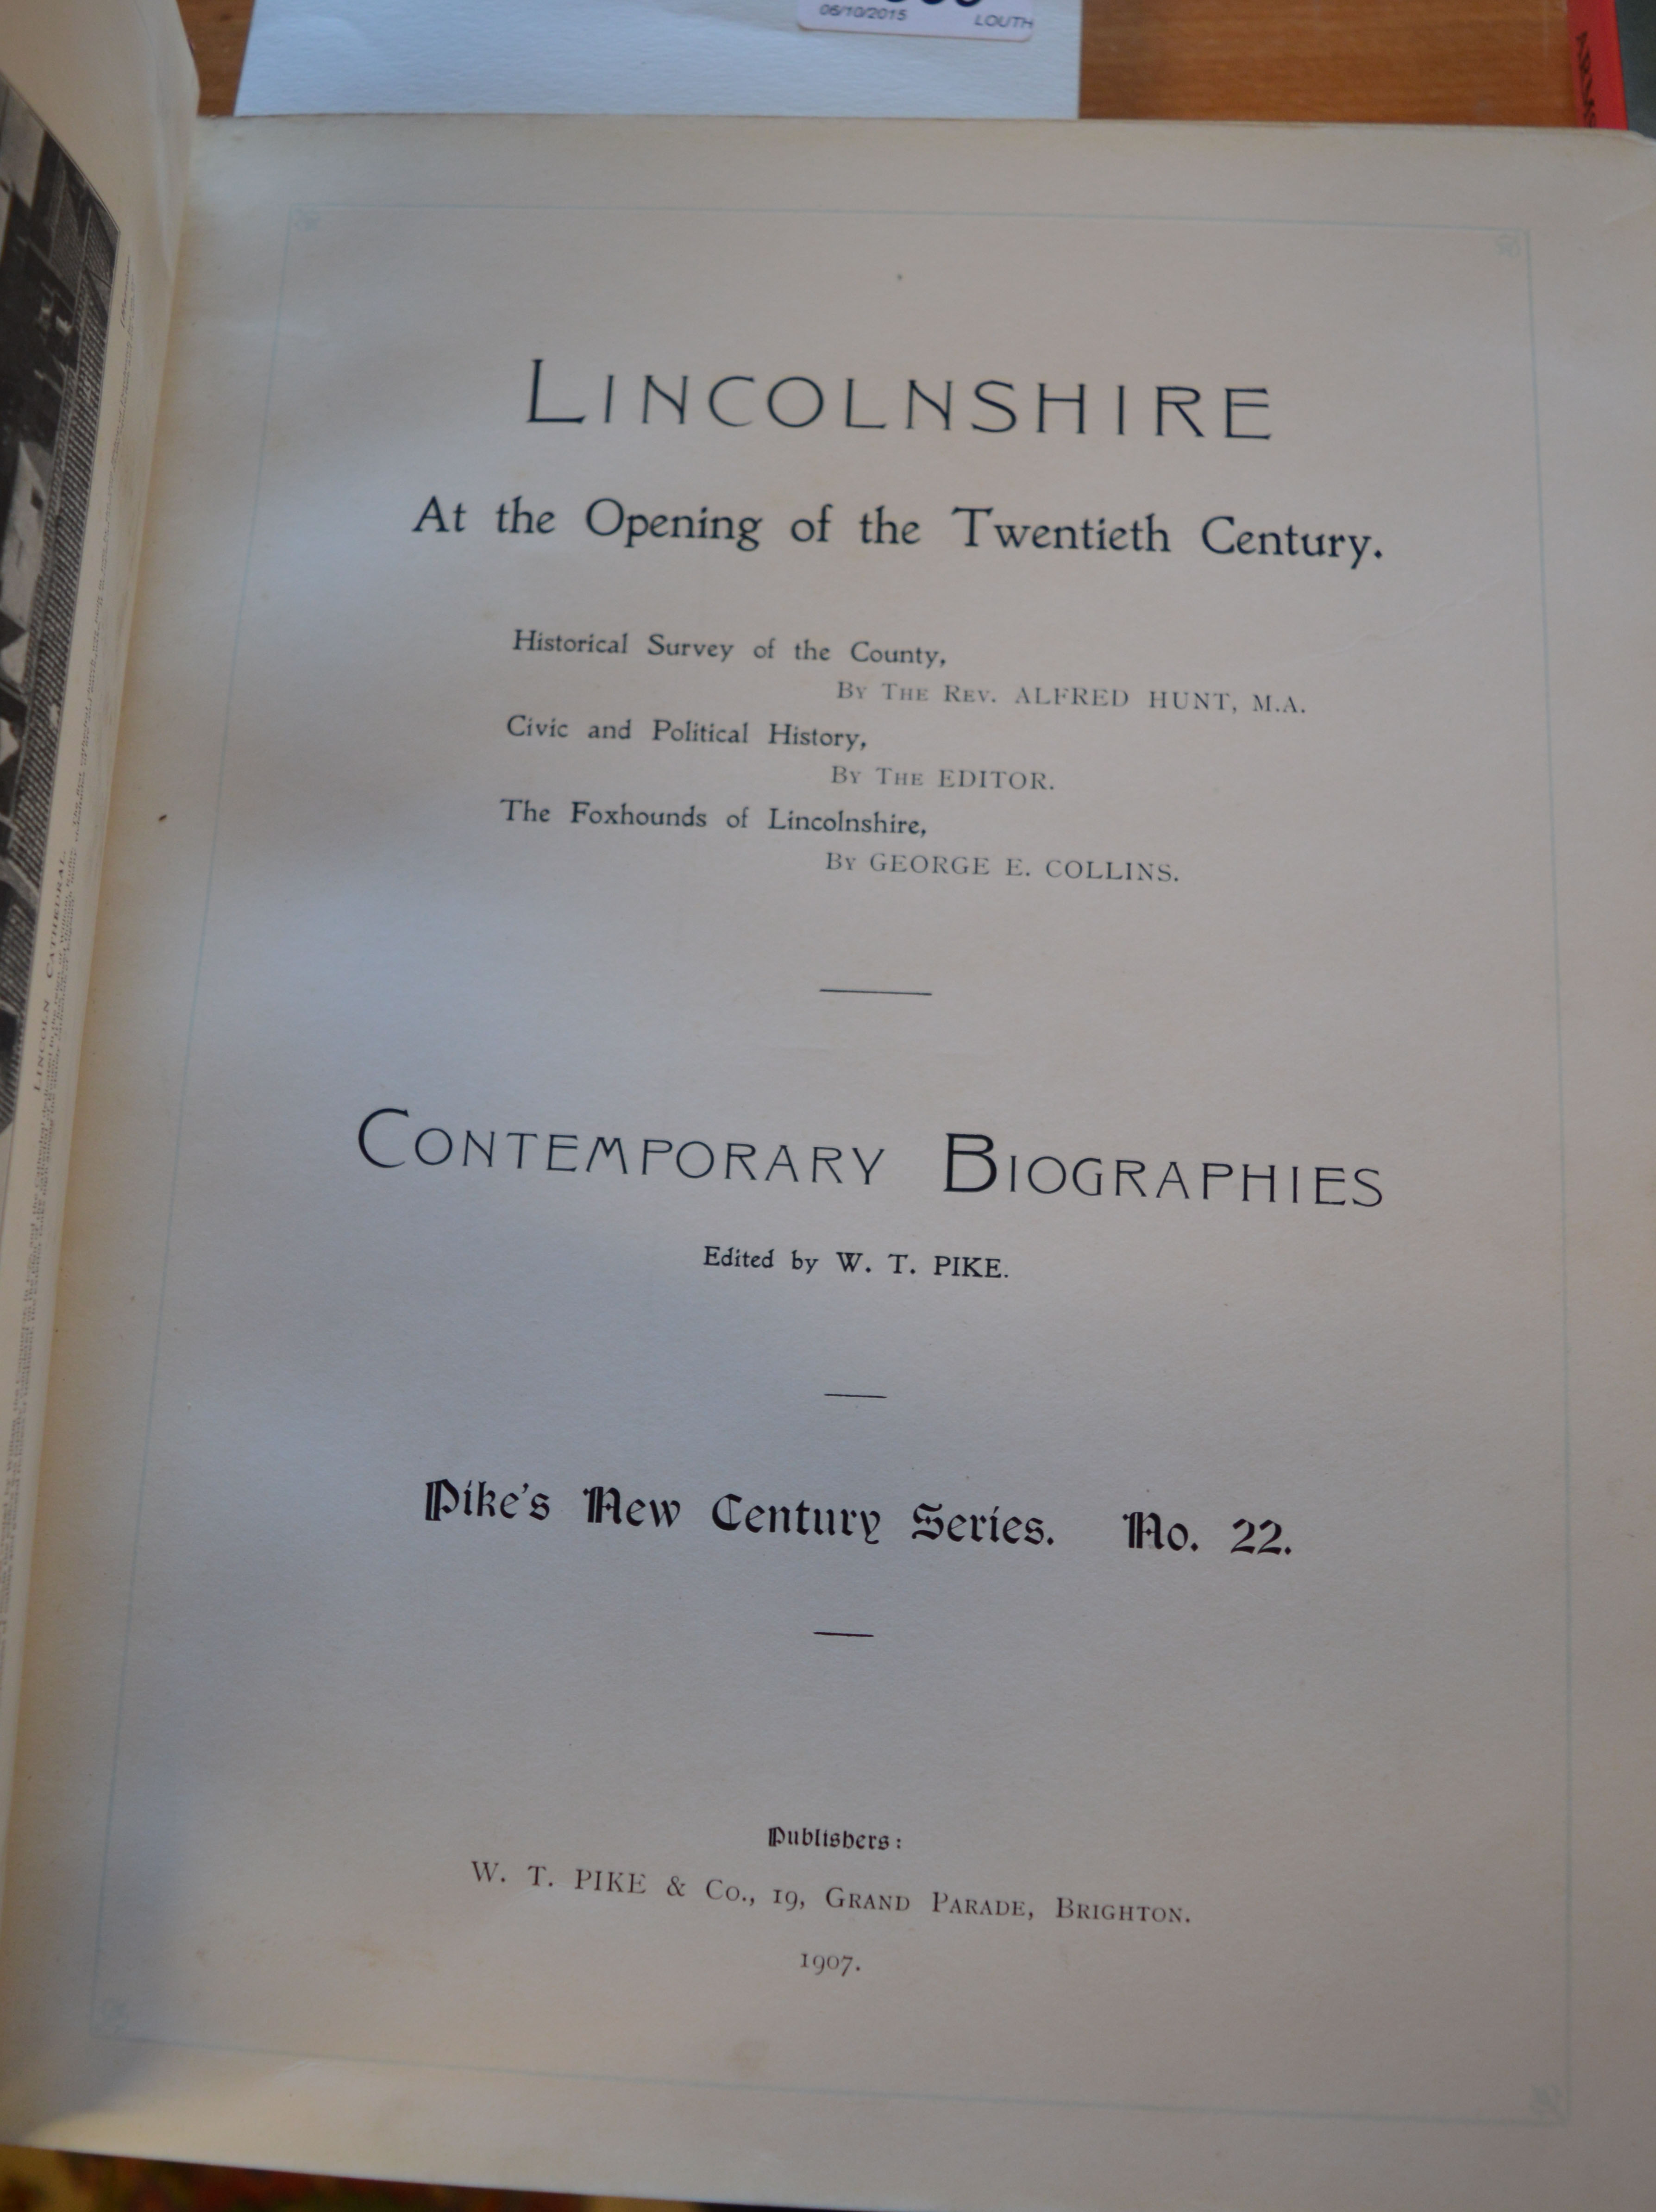 Contemporary Biographies of Lincolnshire - Image 3 of 3